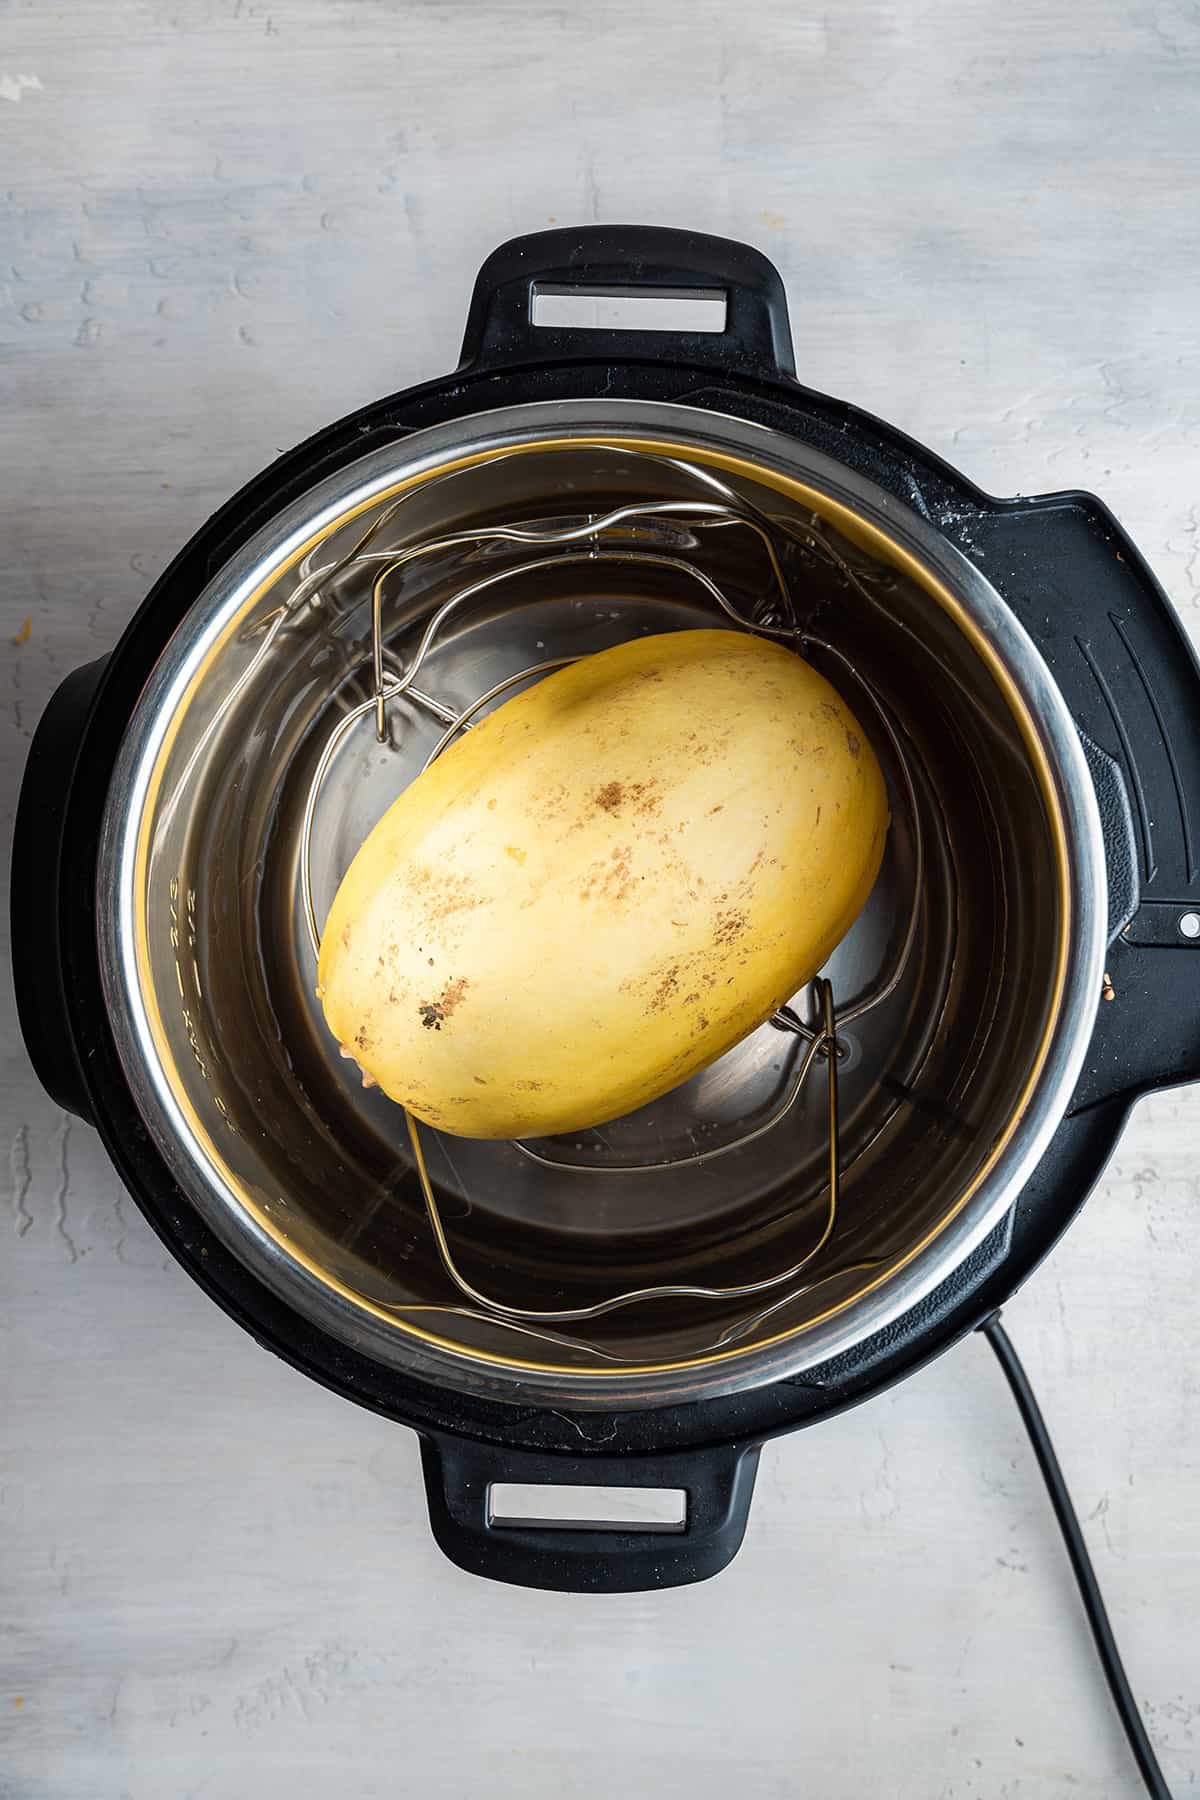 Half of an uncooked spaghetti squash face down in an instant pot